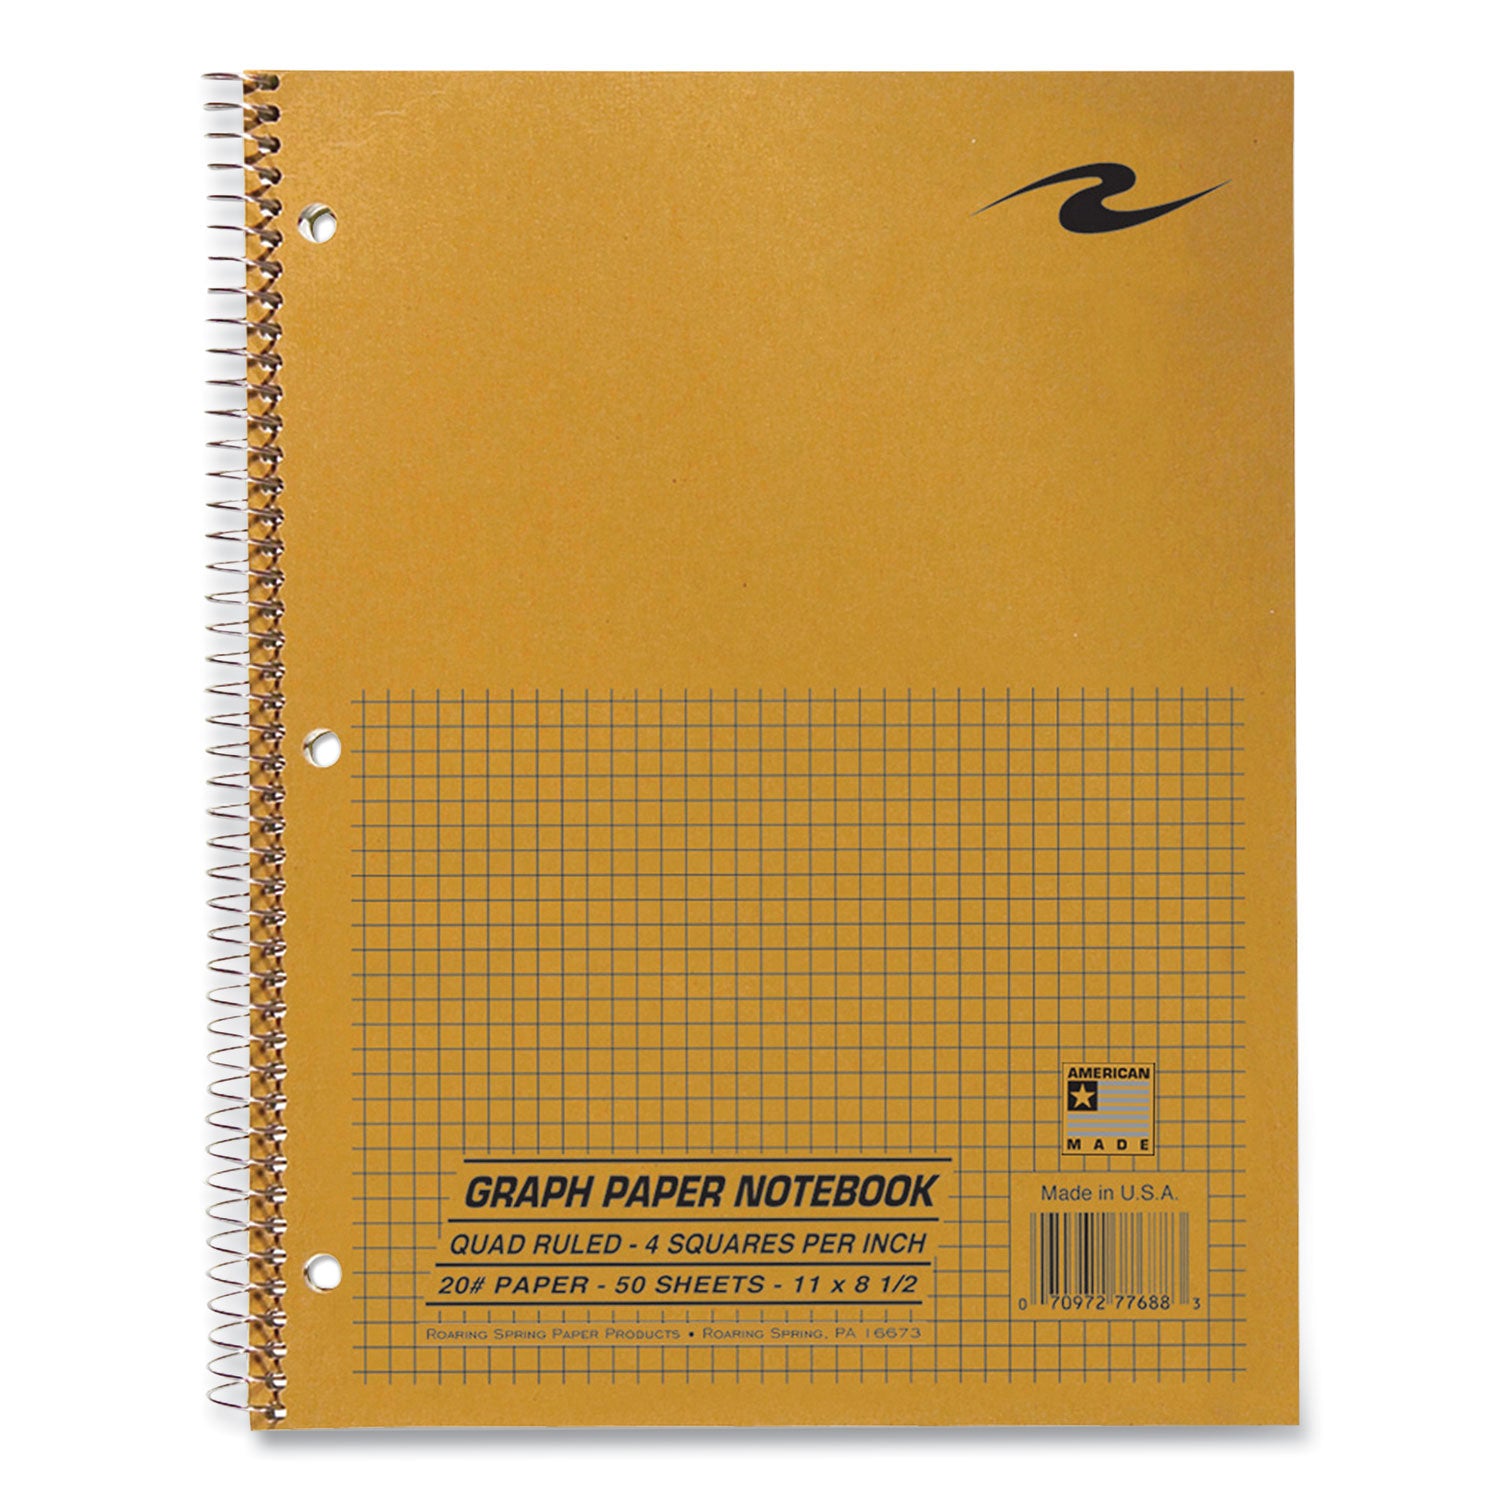 lab-and-science-wirebound-notebook-quadrille-rule-4-sq-in-brown-cover-50-85-x-11-sheets-24-ct-ships-in-4-6-bus-days_roa77688cs - 4